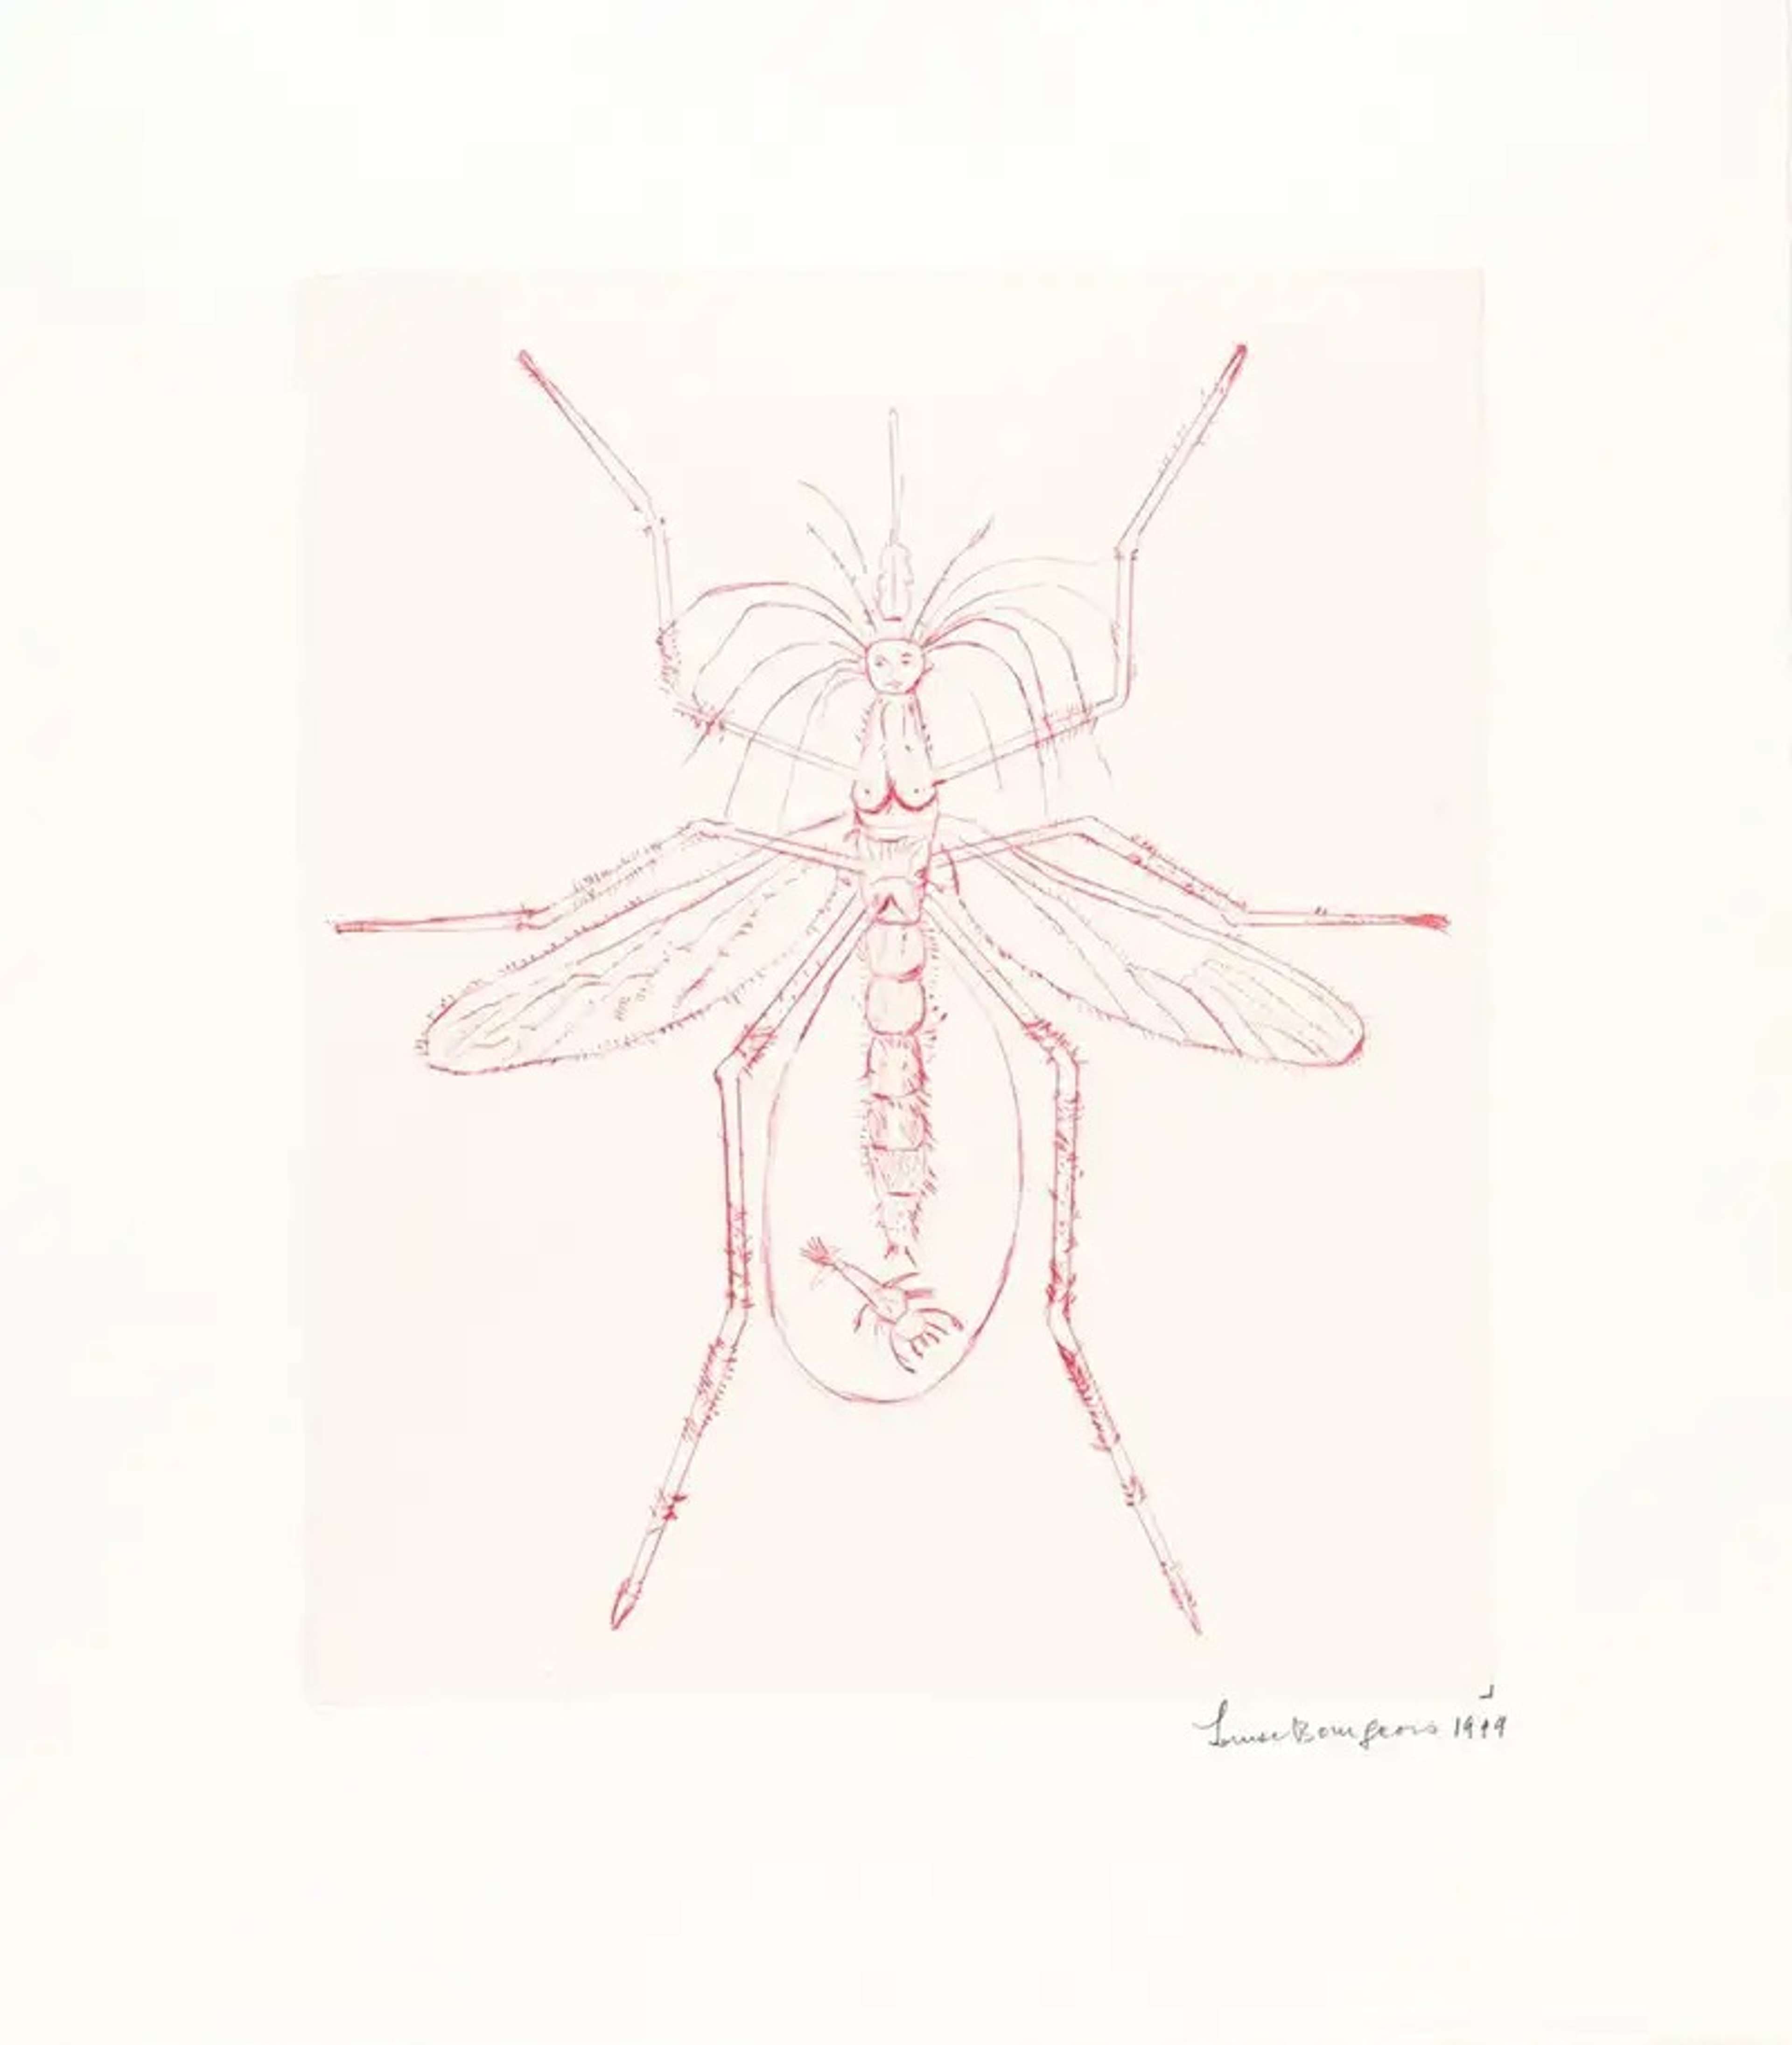 Louise Bourgeois’ Mosquito. A drypoint print of a red mosquito in the likeness of a woman with a child in its womb.